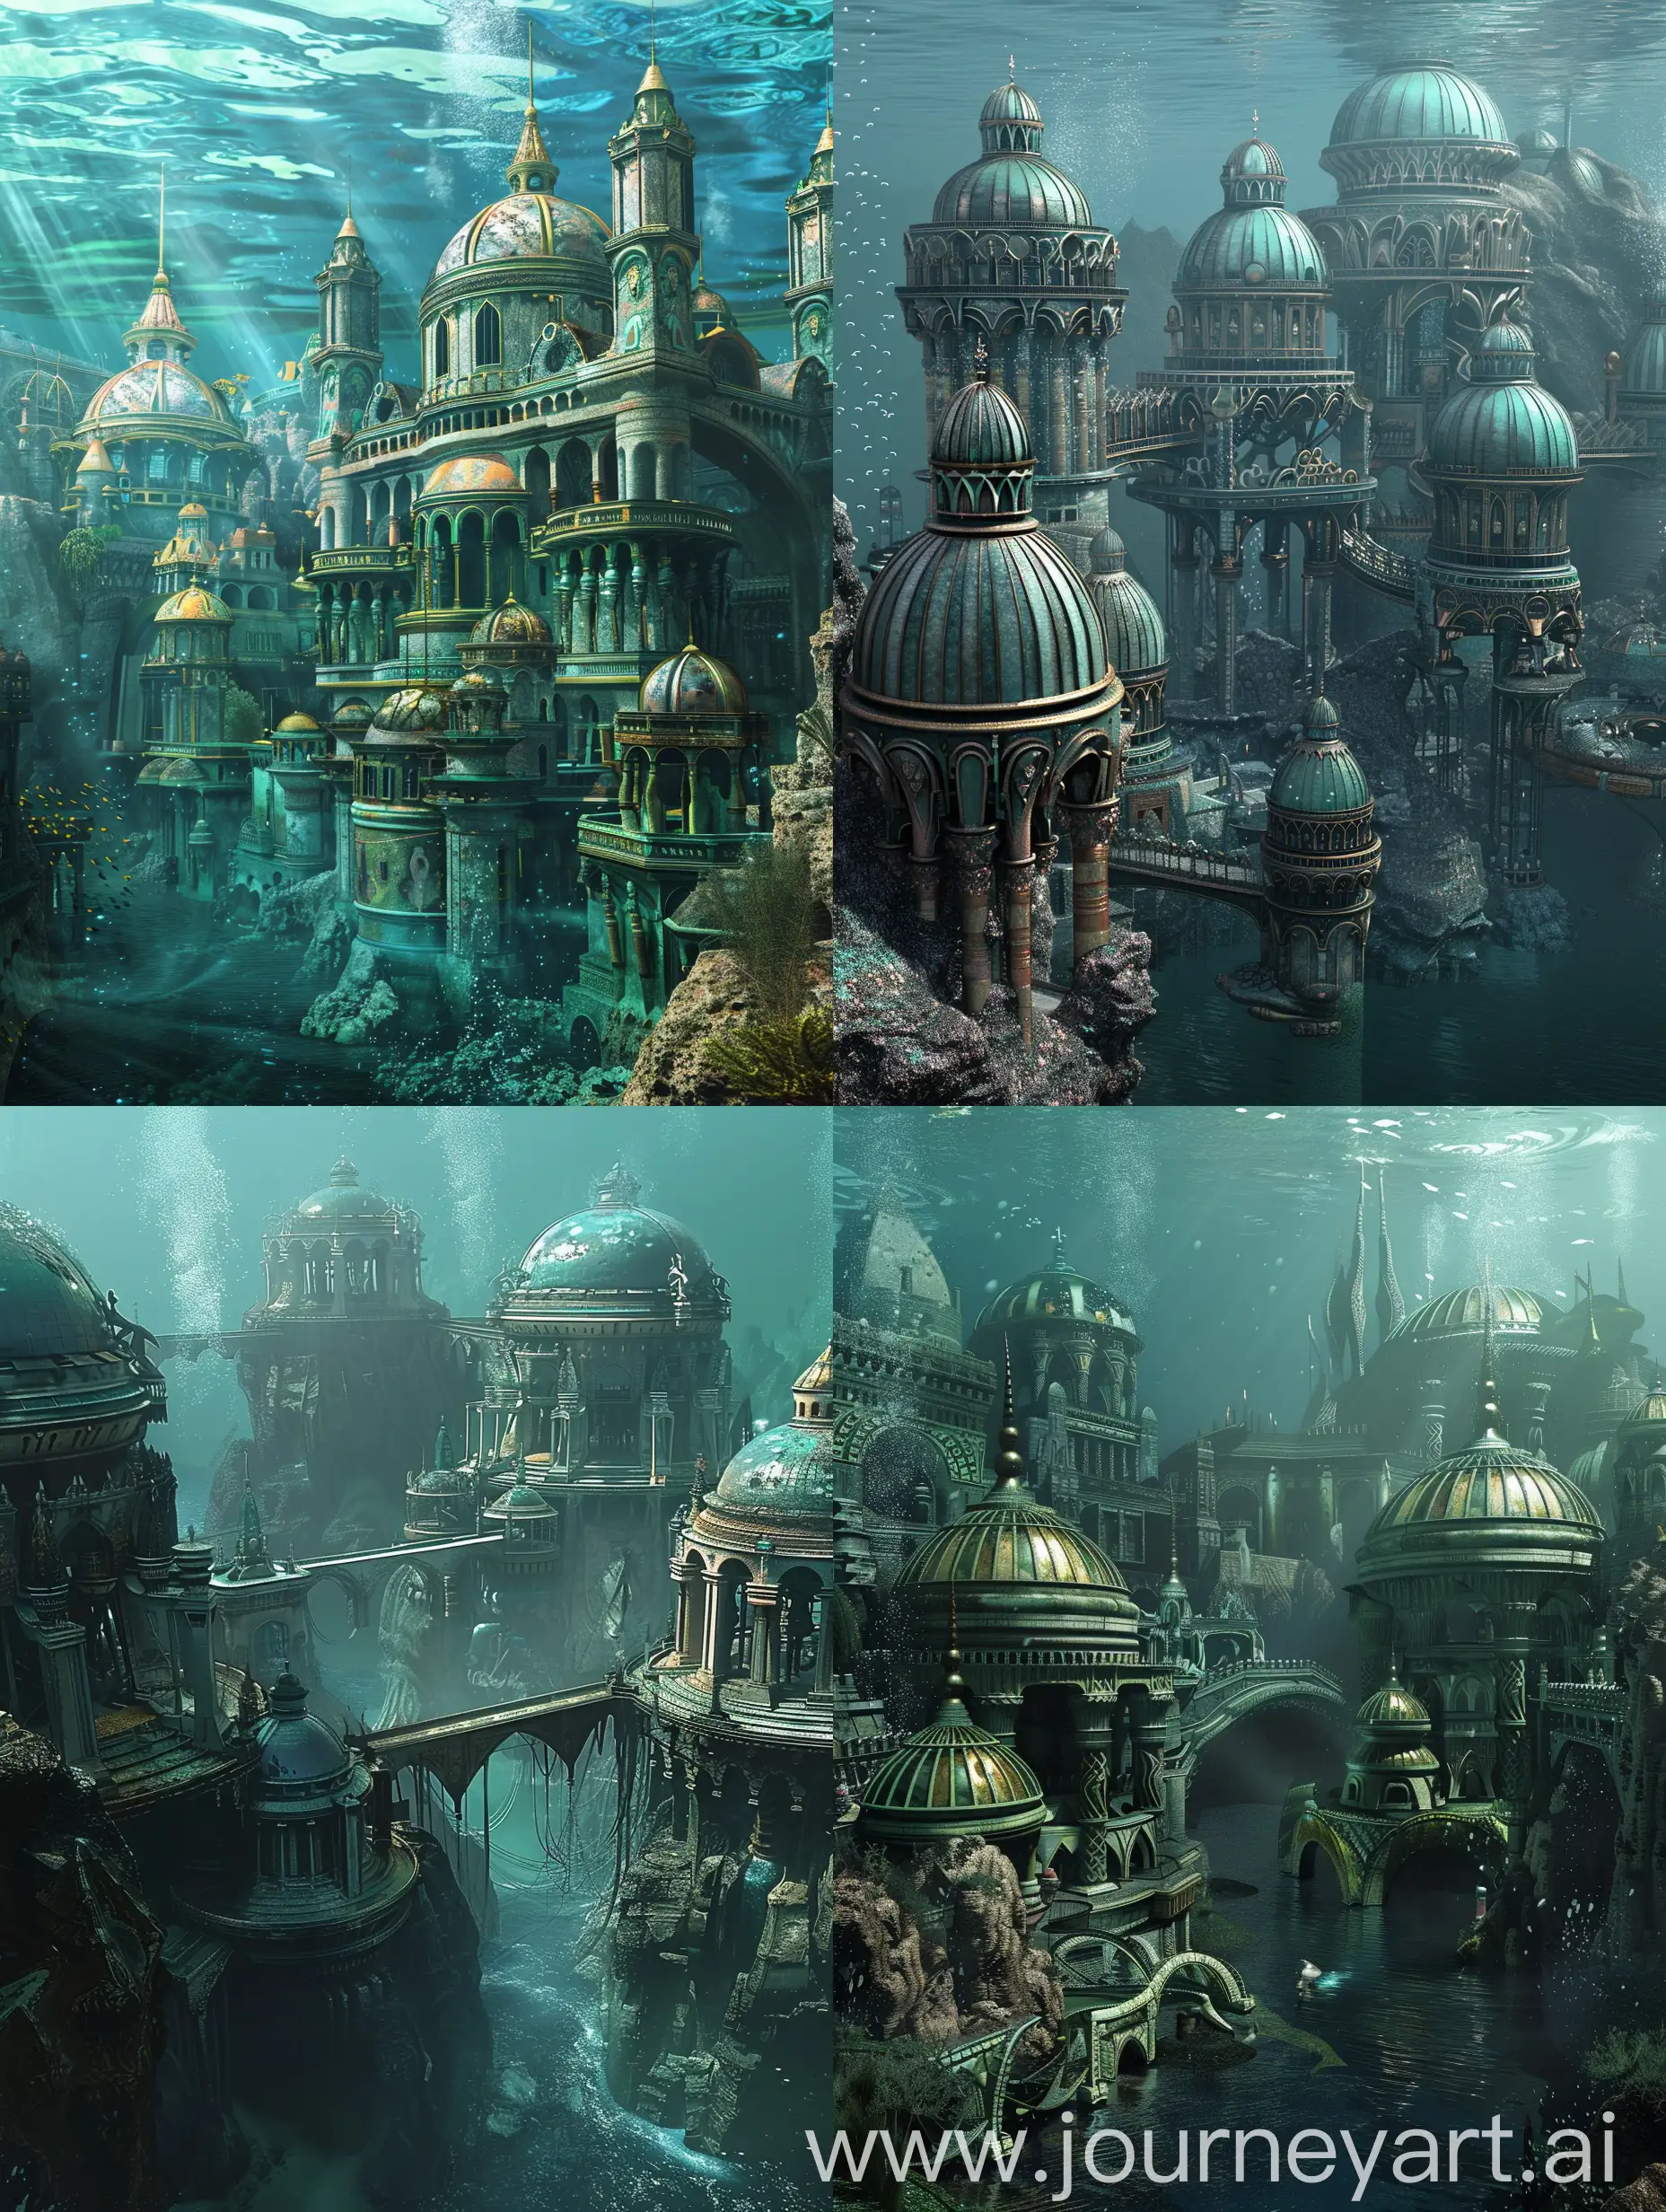 Futuristic-Underwater-City-with-DomeCupola-Roofs